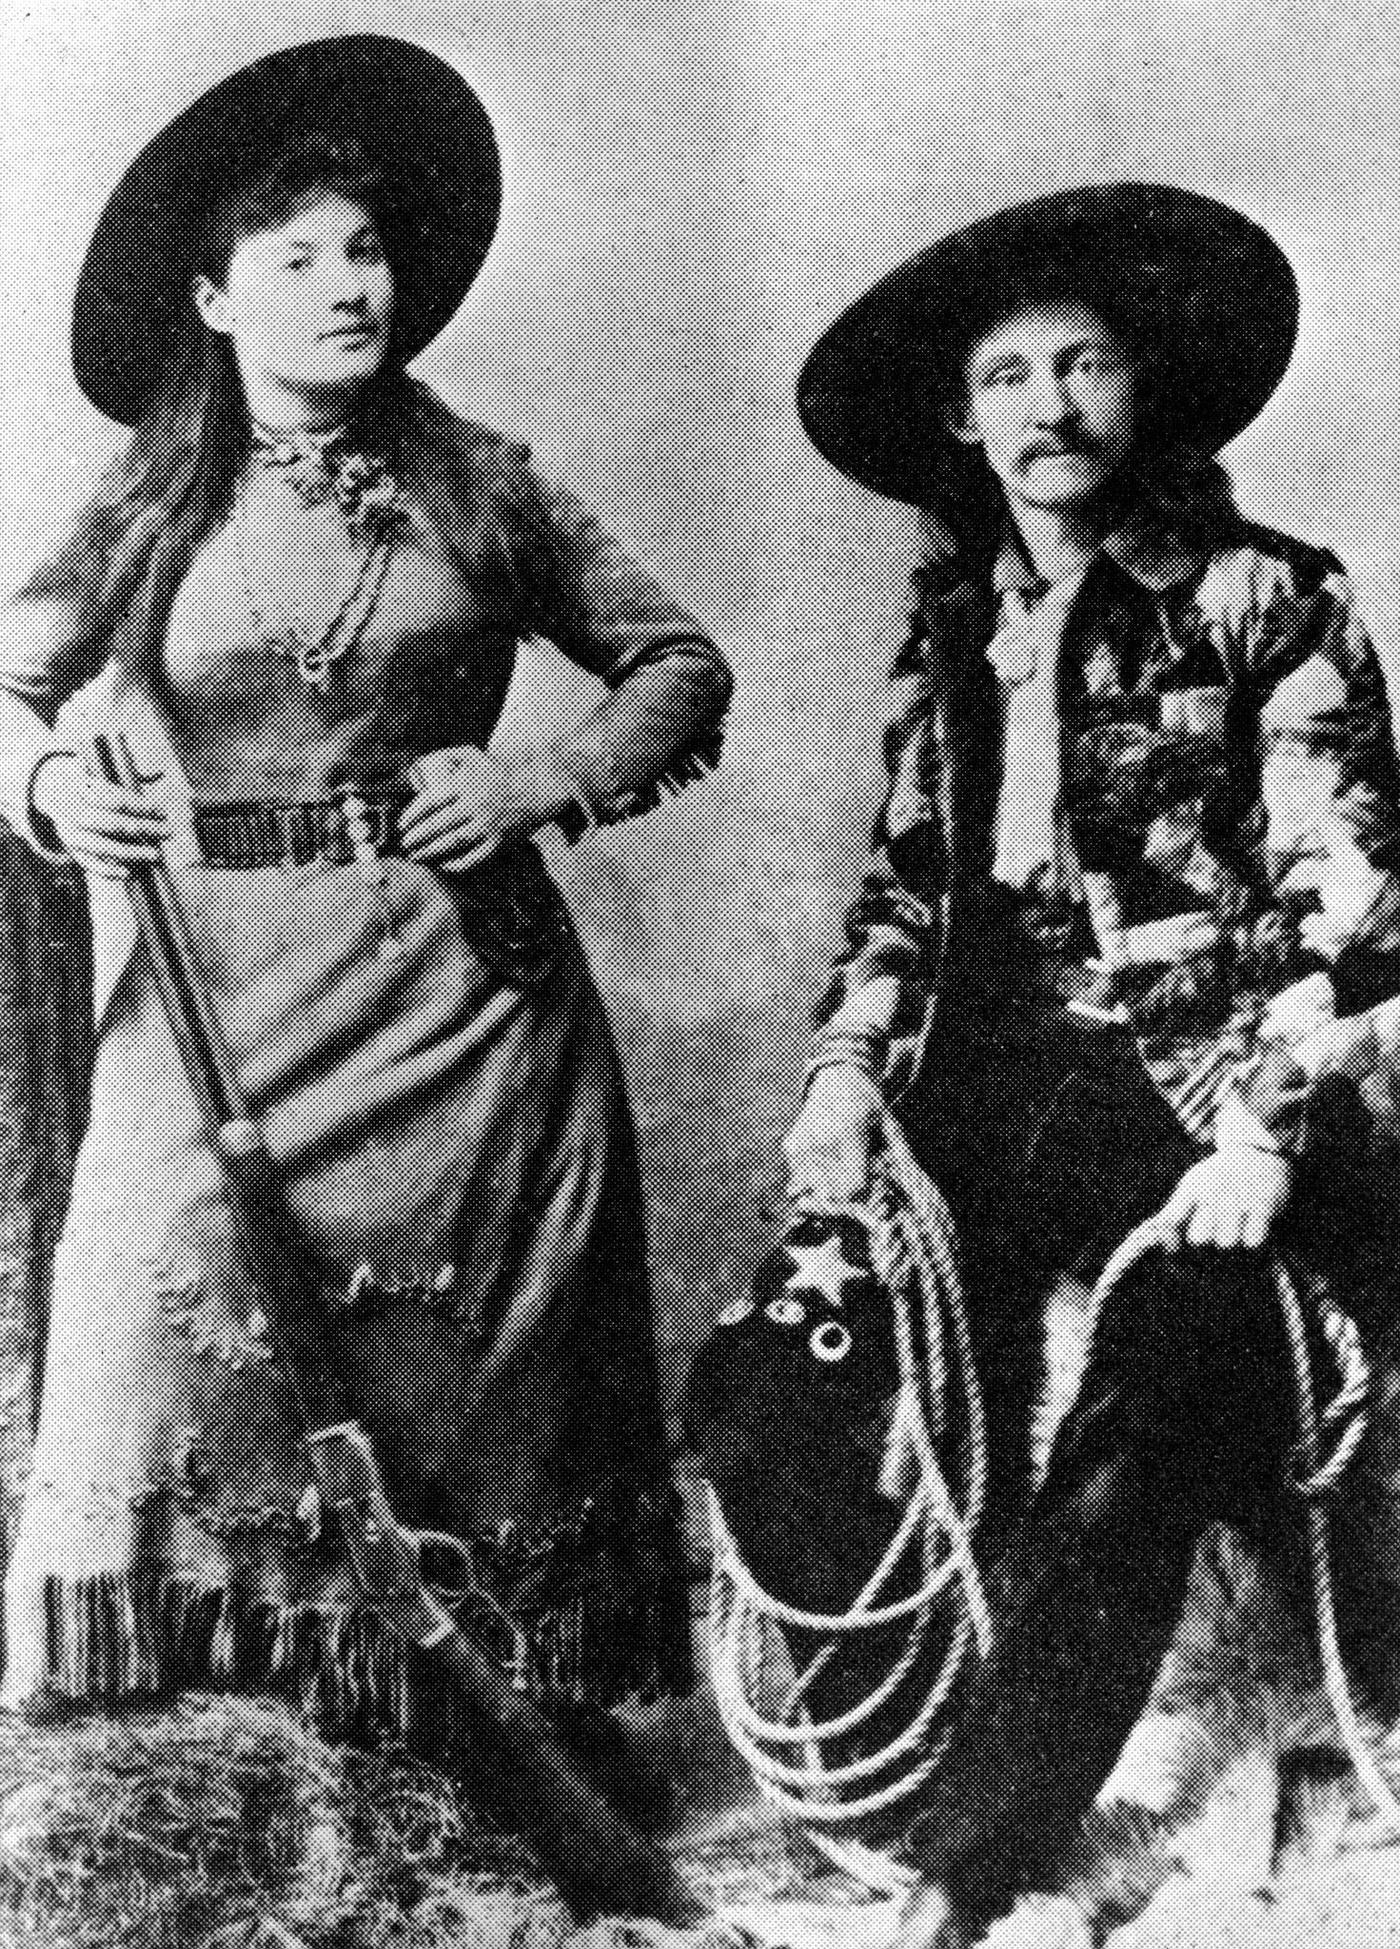 Publicity portrait of Annie Oakley & Texas Bill, late 1800s: American sharpshooter Annie Oakley (1860 - 1926) poses with one knee on a haybale and a shotgun on her hand, while Texas Bill Shufflebottom sits on a haybale with a lasso over his knee. The photograph was used to advertise her performances with Buffalo Bill's Wild West Show.